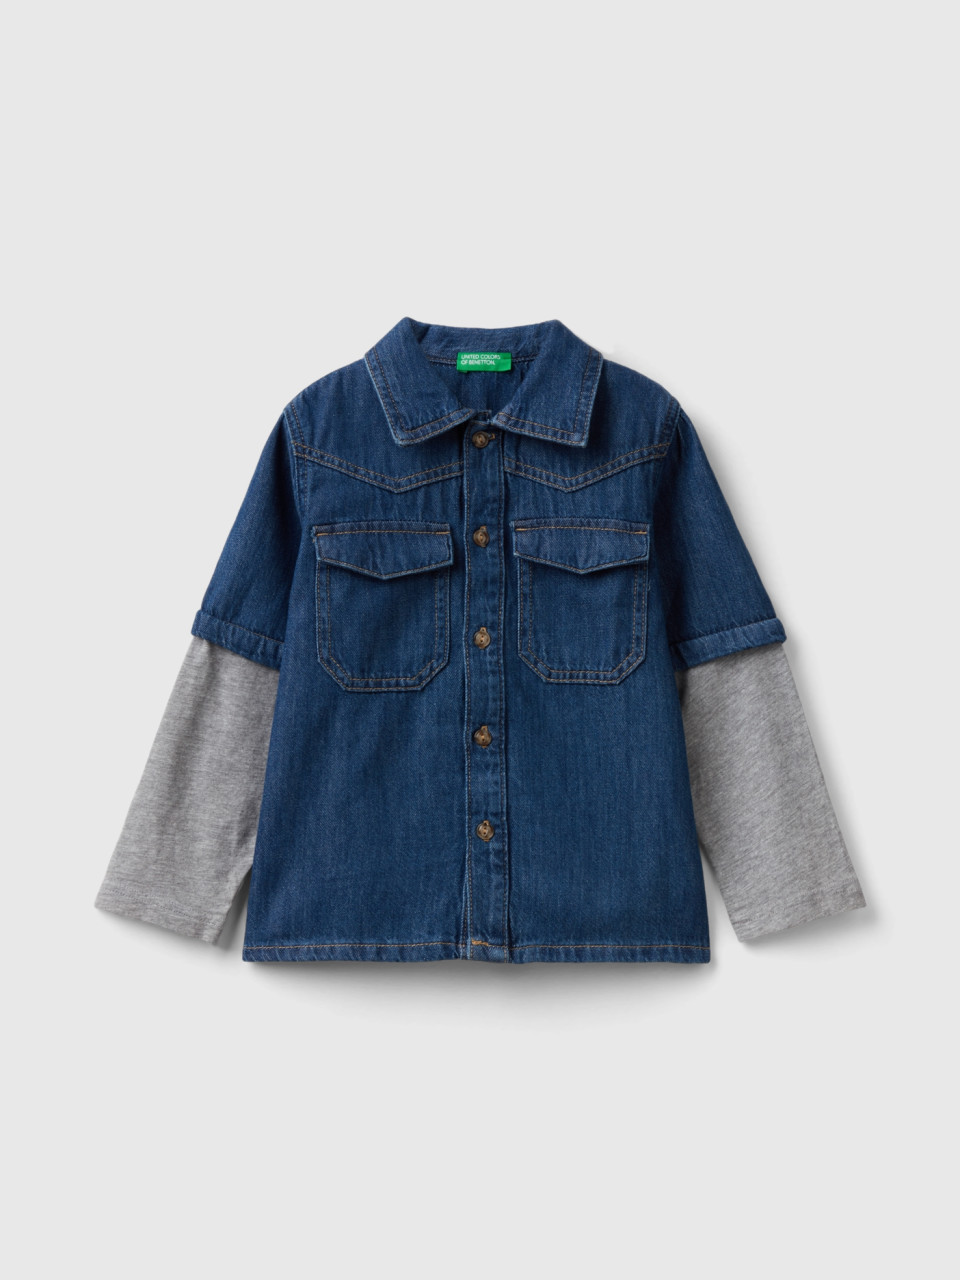 Benetton, Shirt With Double Sleeves, Dark Blue, Kids